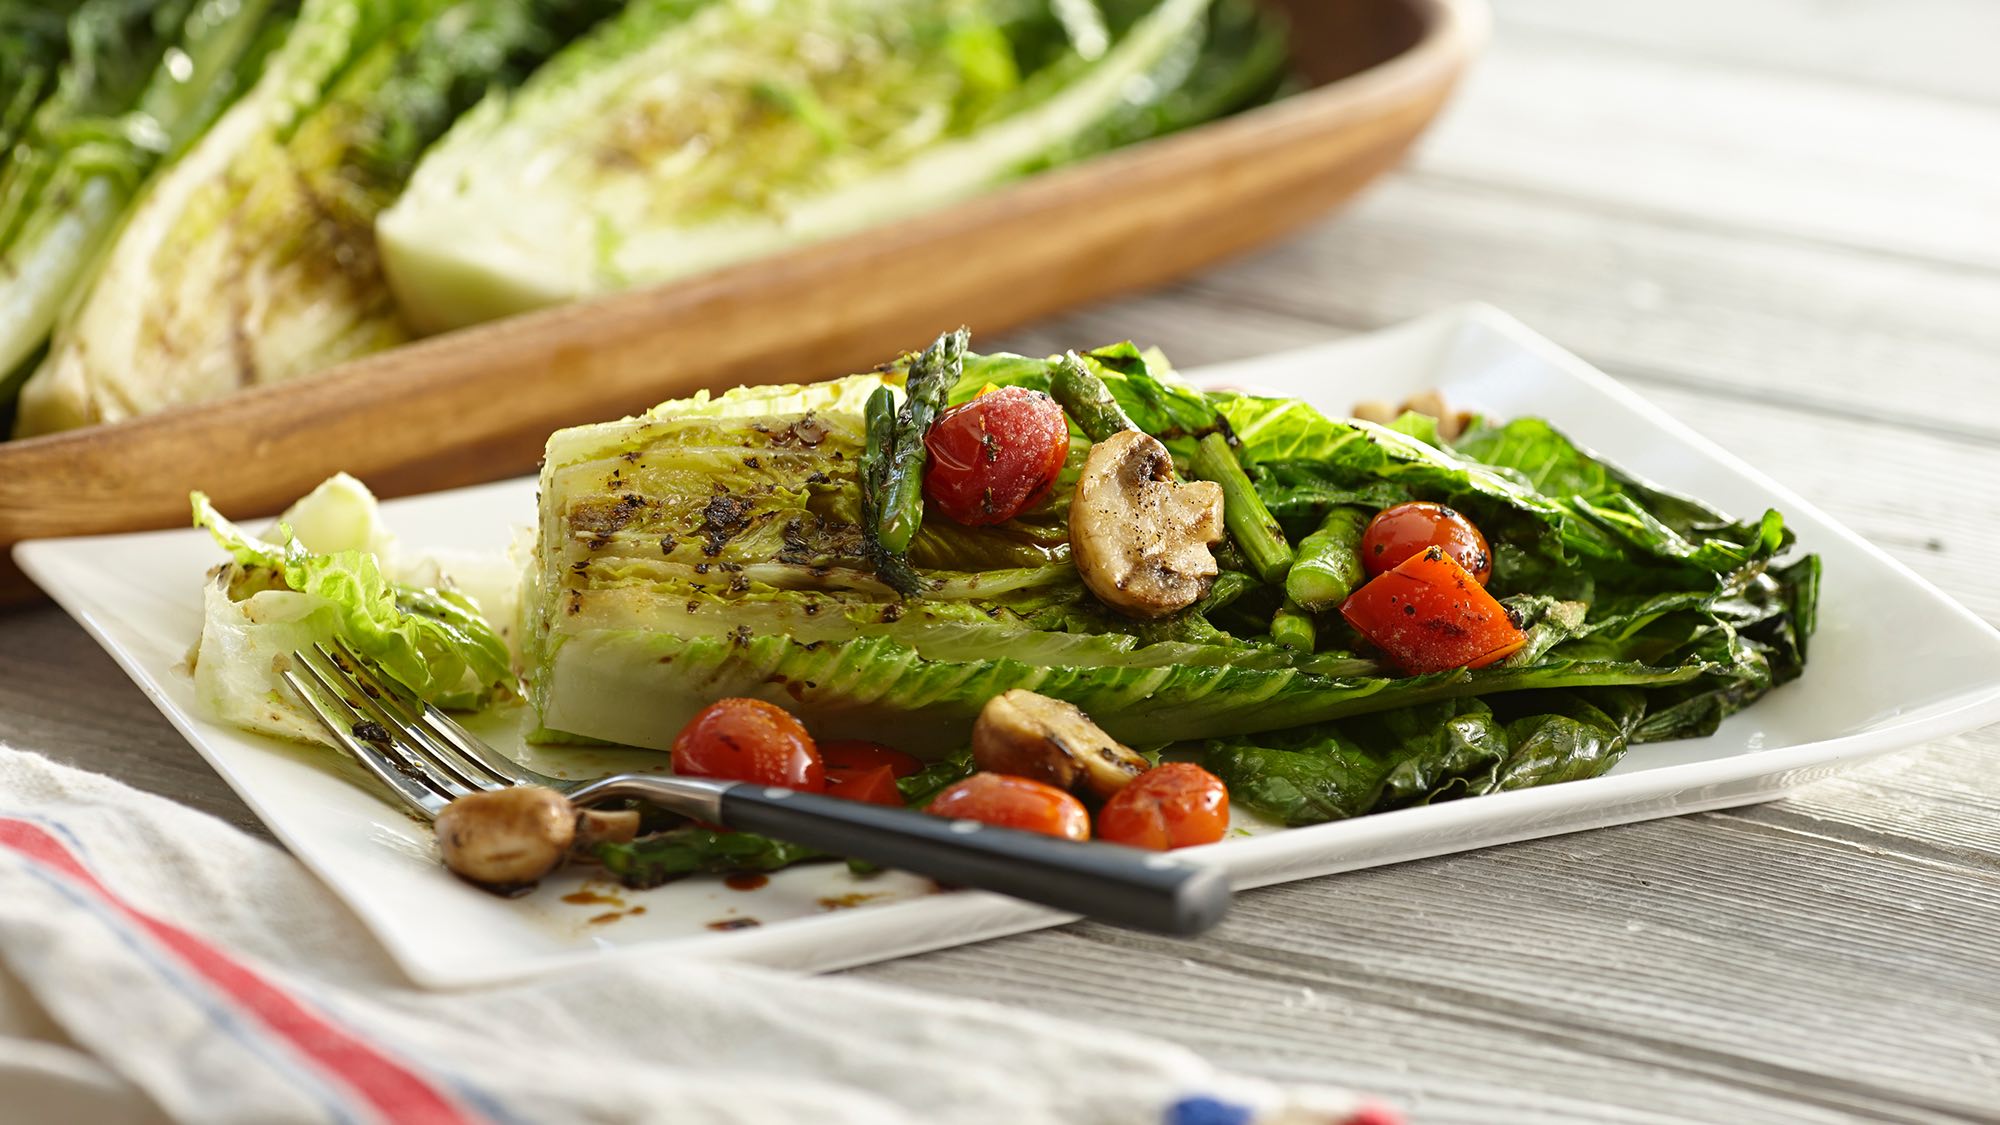 grilled-romaine-and-vegetable-salad-with-balsamic-herb-vinaigrette.jpg